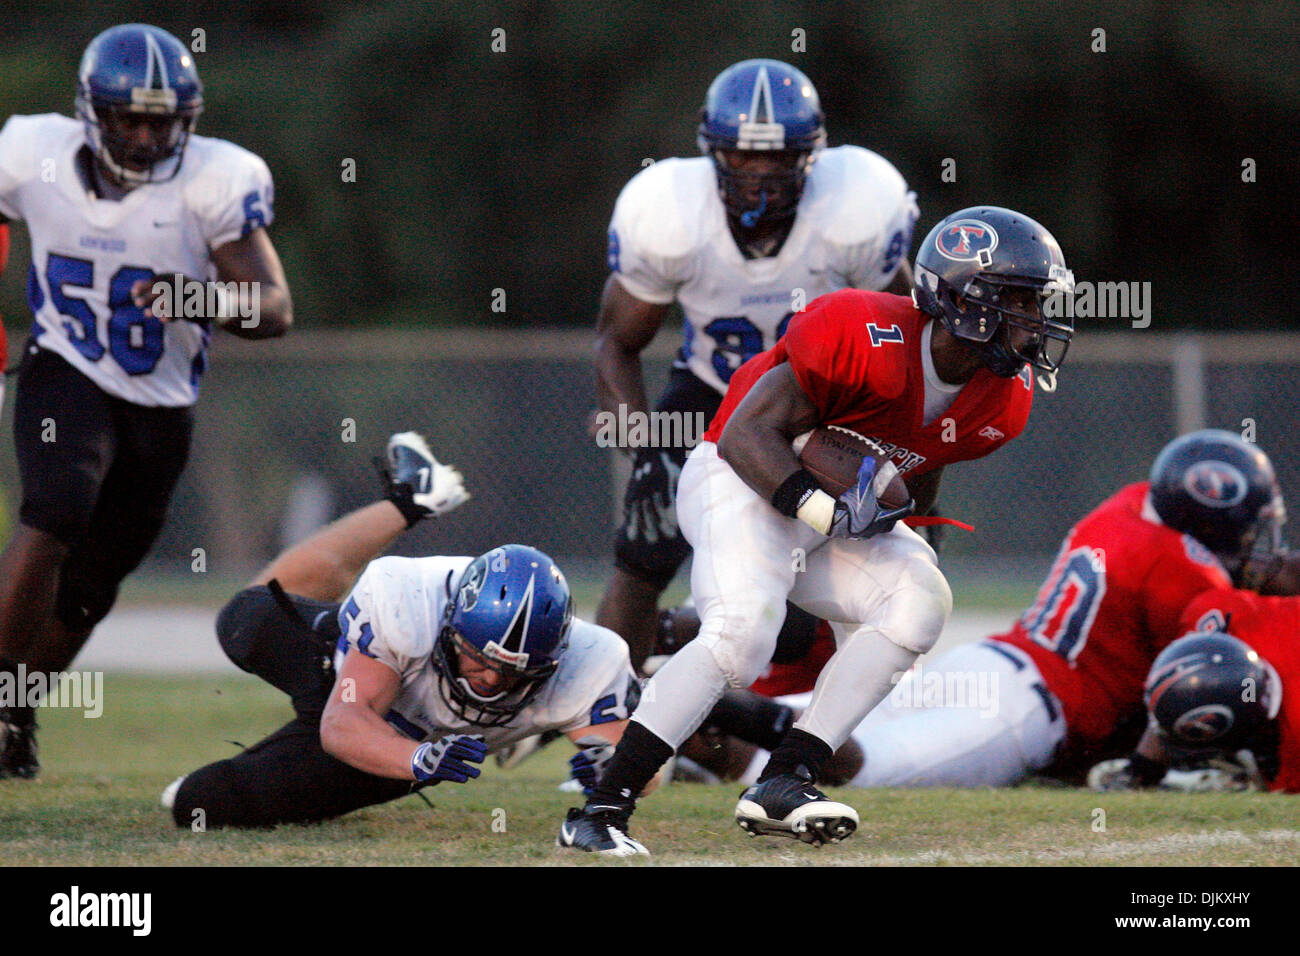 Sept. 16, 2010 - Tampa, FL, USA - TP 328018 FOUN FBALL 6.EDMUND D. FOUNTAIN | Times .(09/16/2010 Tampa) Tampa Bay Tech's Devontae McCloud moves the ball down the field against Armwood High School on September 16, 2010 at Tampa Bay Technical High School in Tampa.  [EDMUND D. FOUNTAIN, Times] (Credit Image: © St. Petersburg Times/ZUMApress.com) Stock Photo